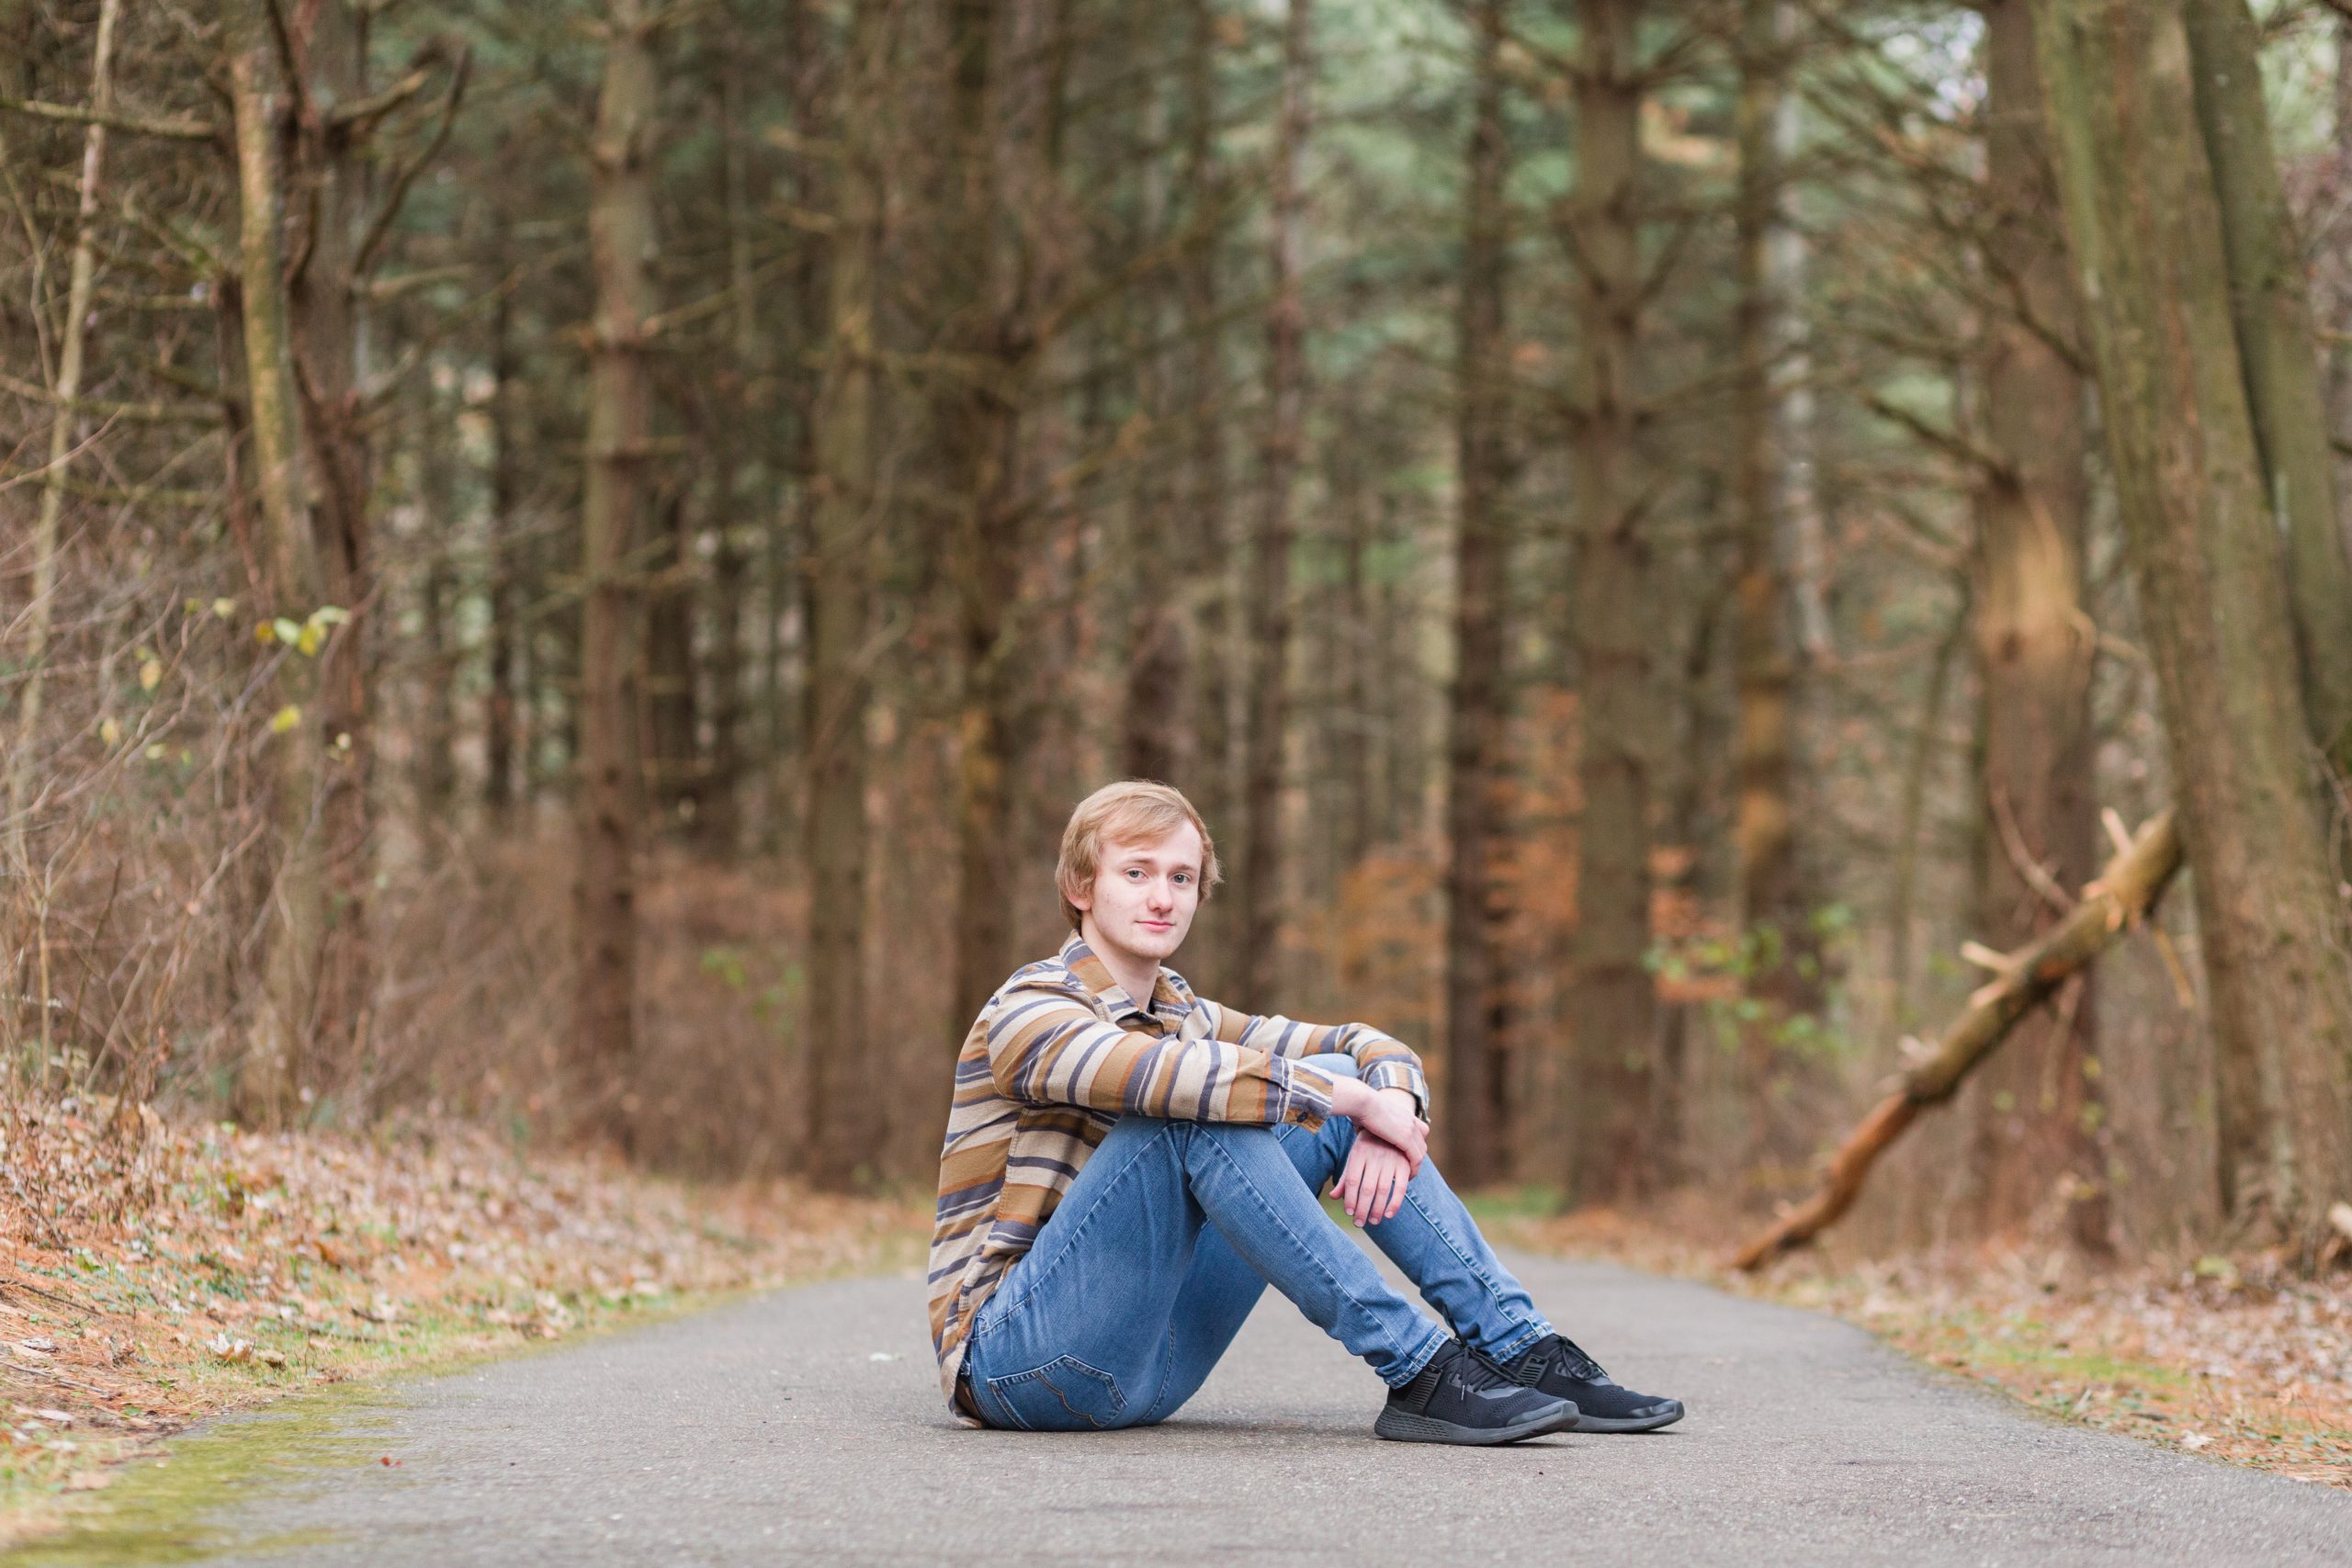 senior guy sitting on path in wooded area with leaves around and tall pines